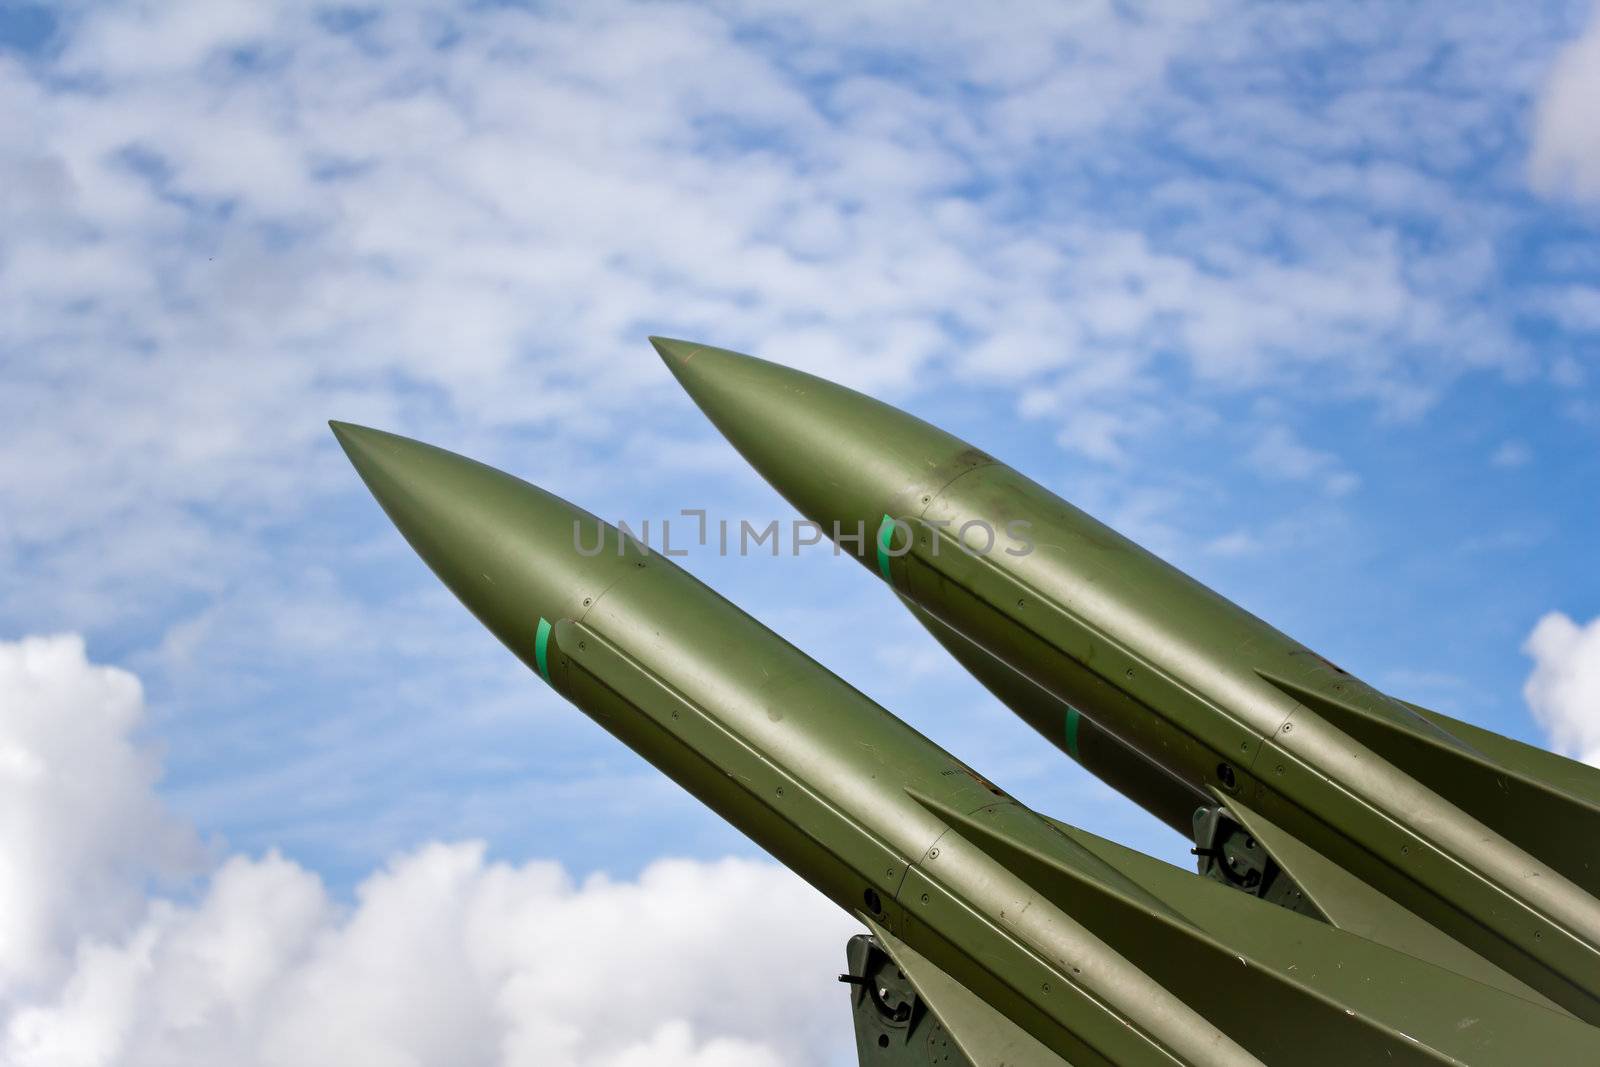 Photograph of two missiles aimed towards the sky during peace time.